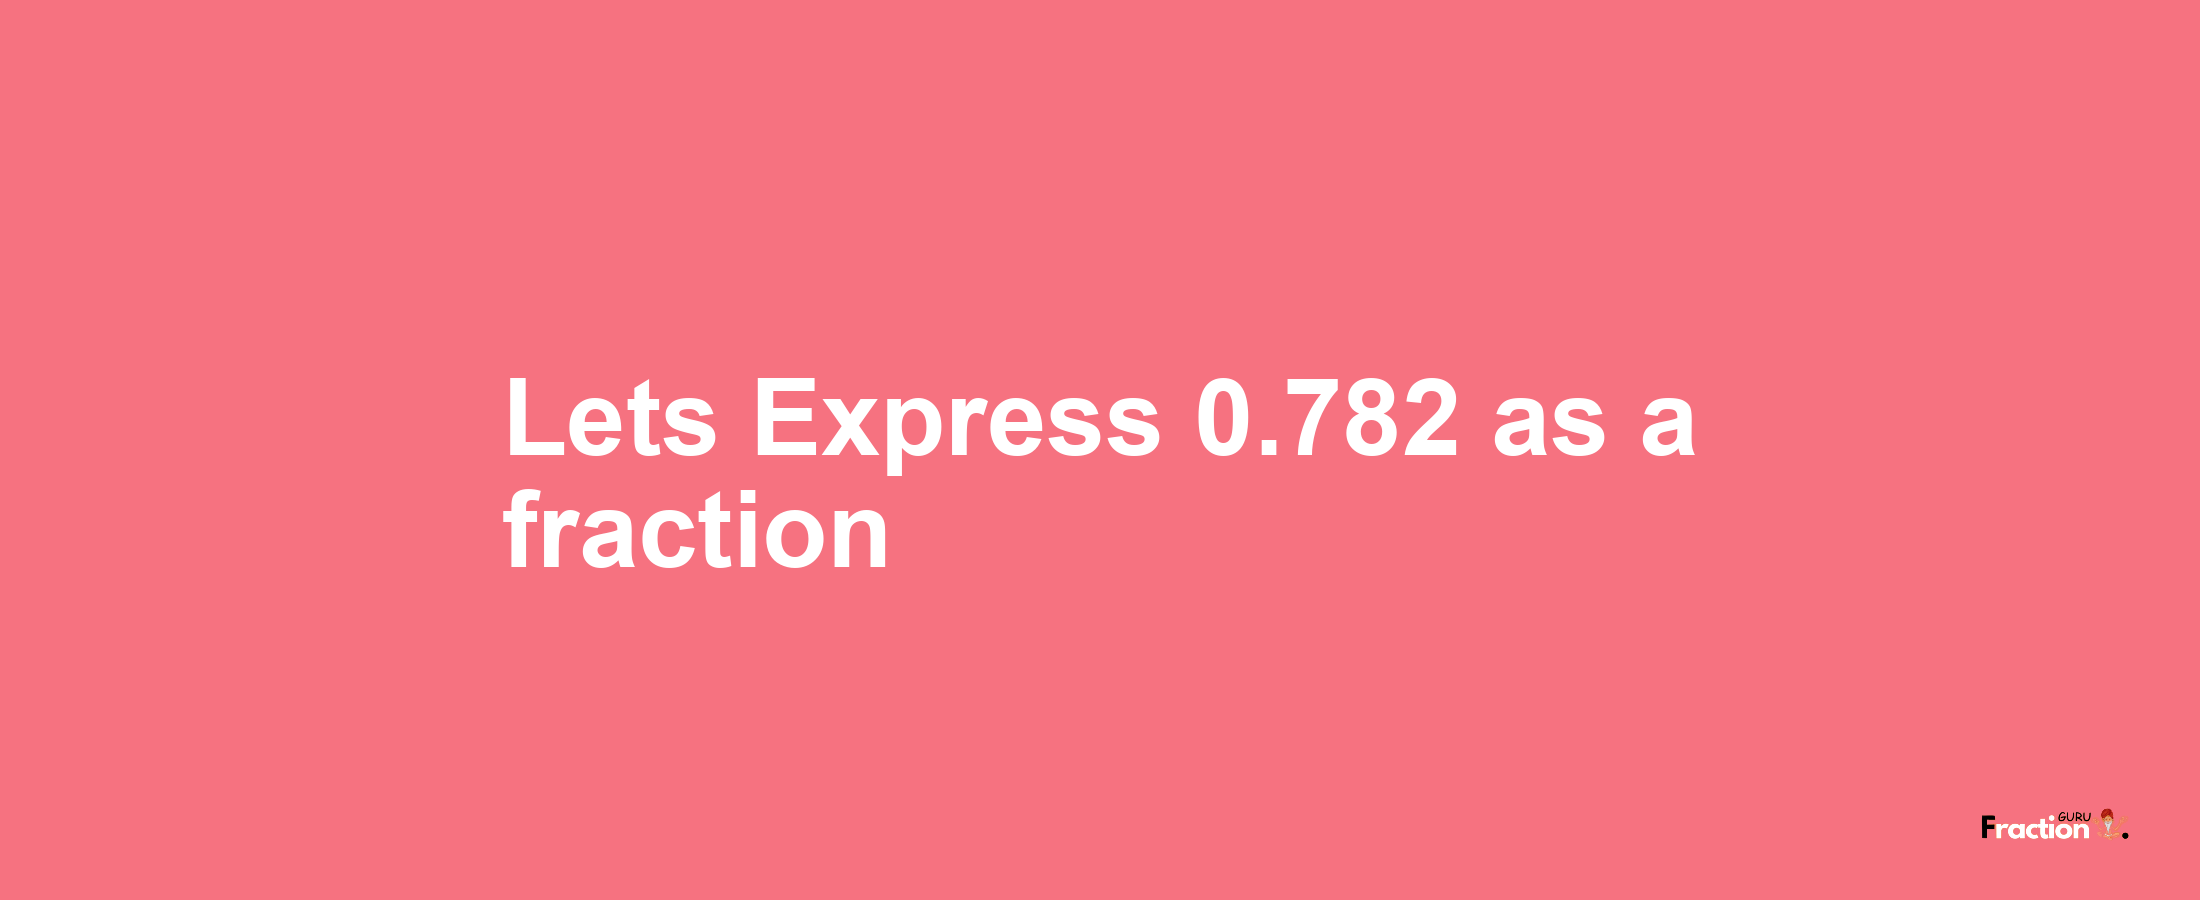 Lets Express 0.782 as afraction